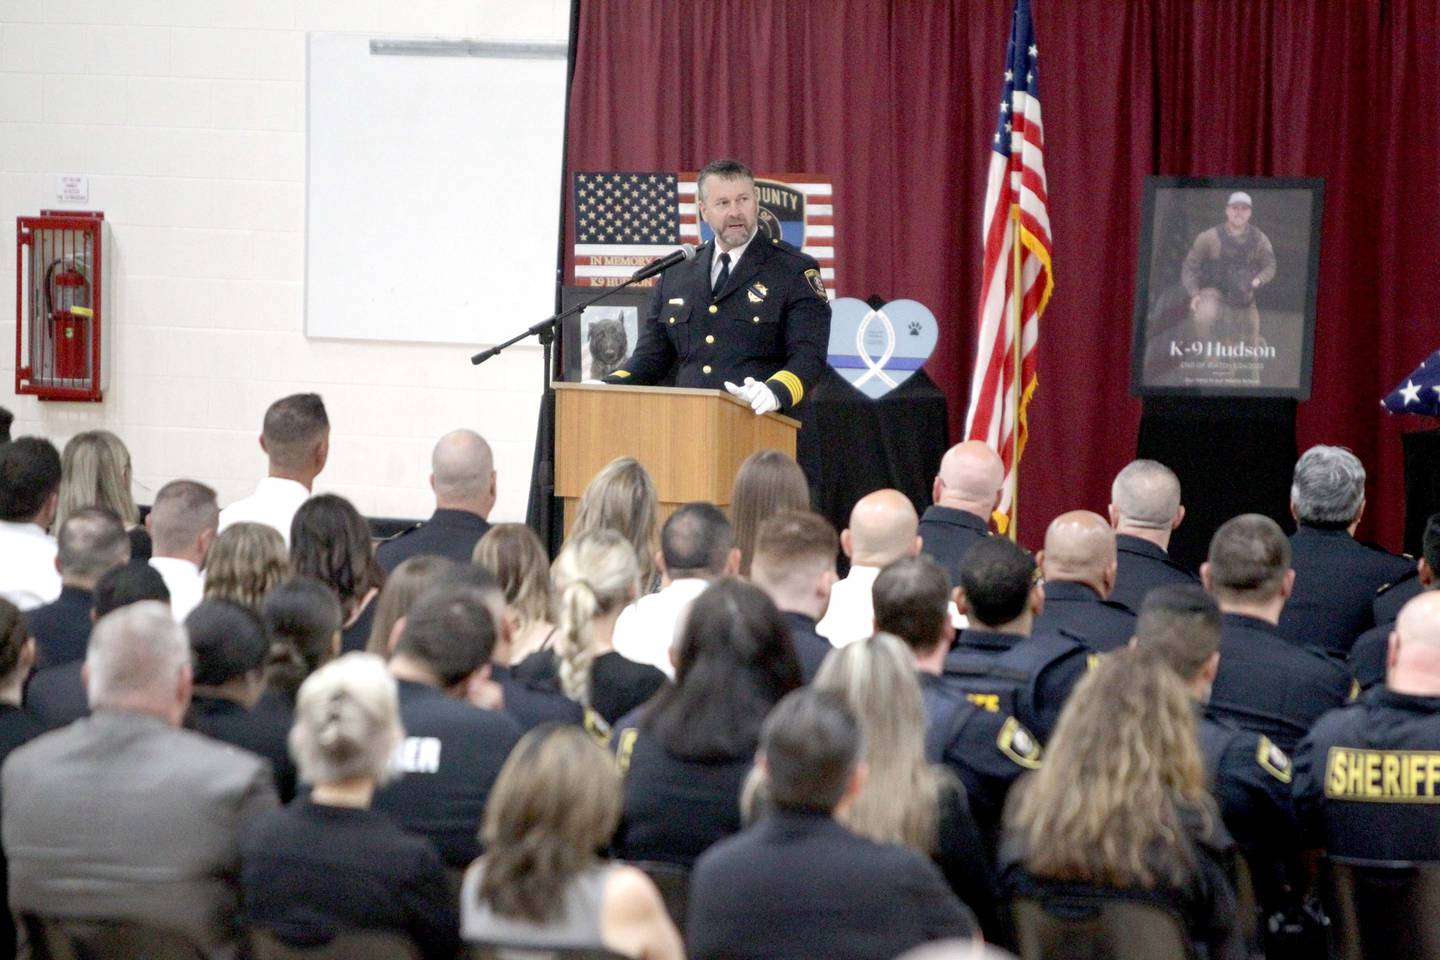 Kane County Sheriff Ron Hain speaks during a funeral in honor of Kane County Sheriff K9 Hudson, who lost his life in the line of duty last month, on Thursday, June 1, 2023 at Kaneland Harter Middle School in Sugar Grove.